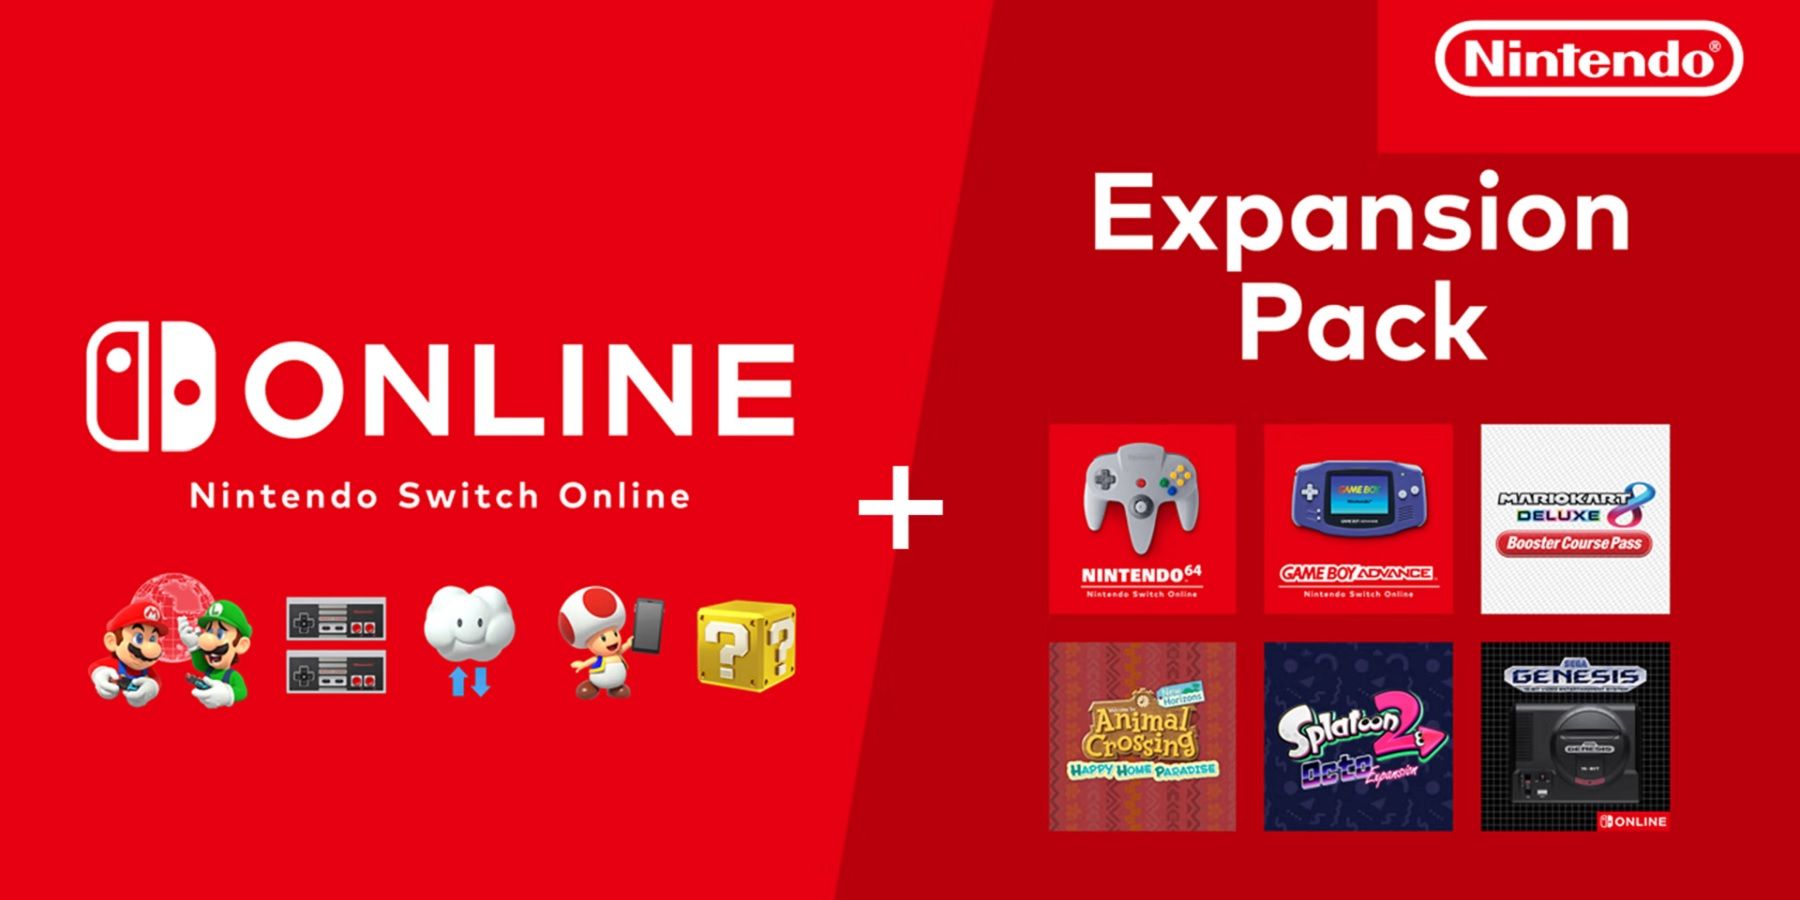 nintendo switch online and expansion pack features